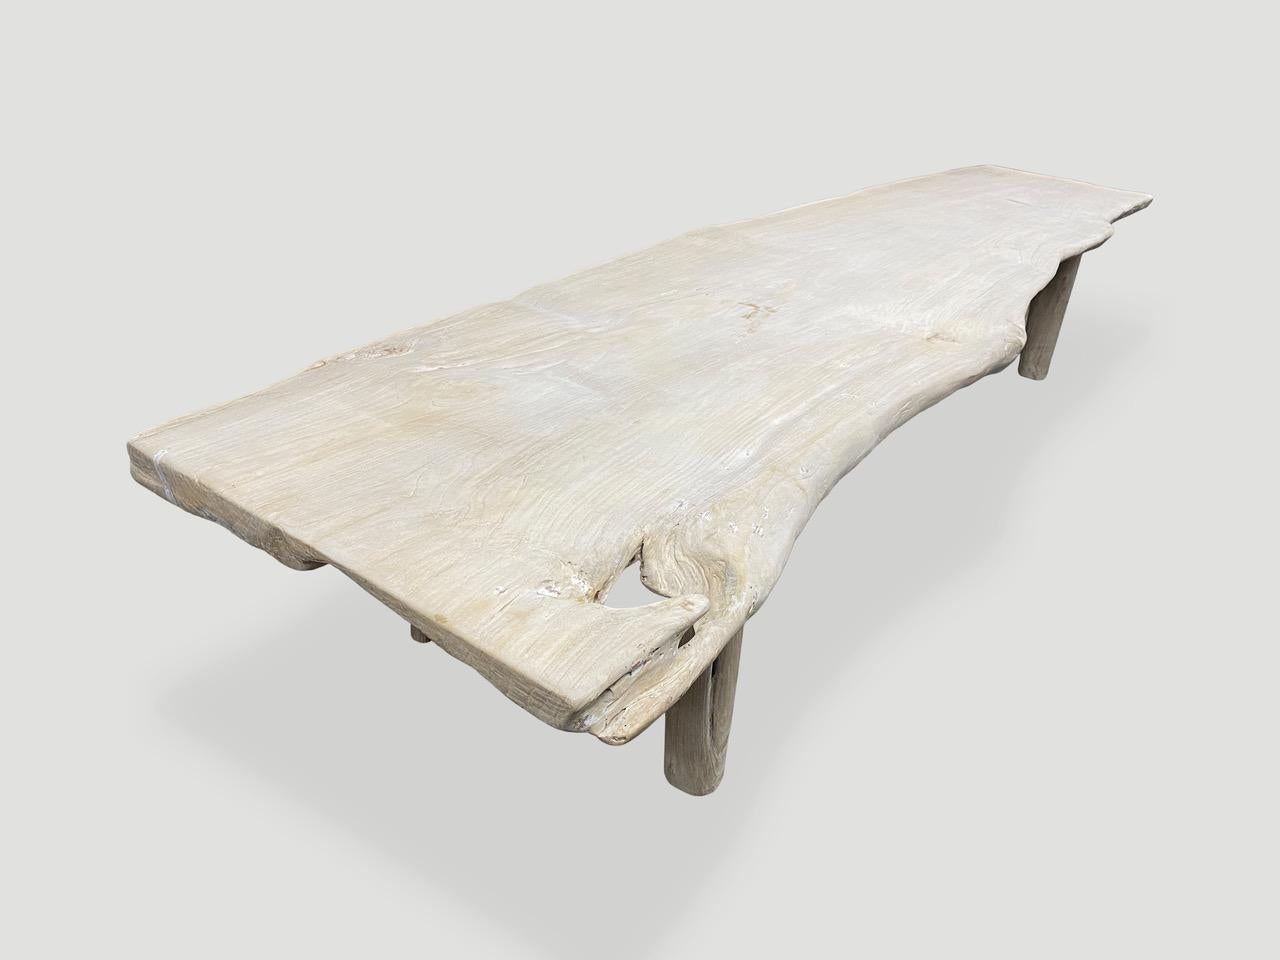 Reclaimed teak wood bench or coffee table. We bleached the wood first and then added a light white wash exposing the beautiful grain of the wood. Finally we added minimalist cylinder legs. This live edge single panel width varies from 26” in the